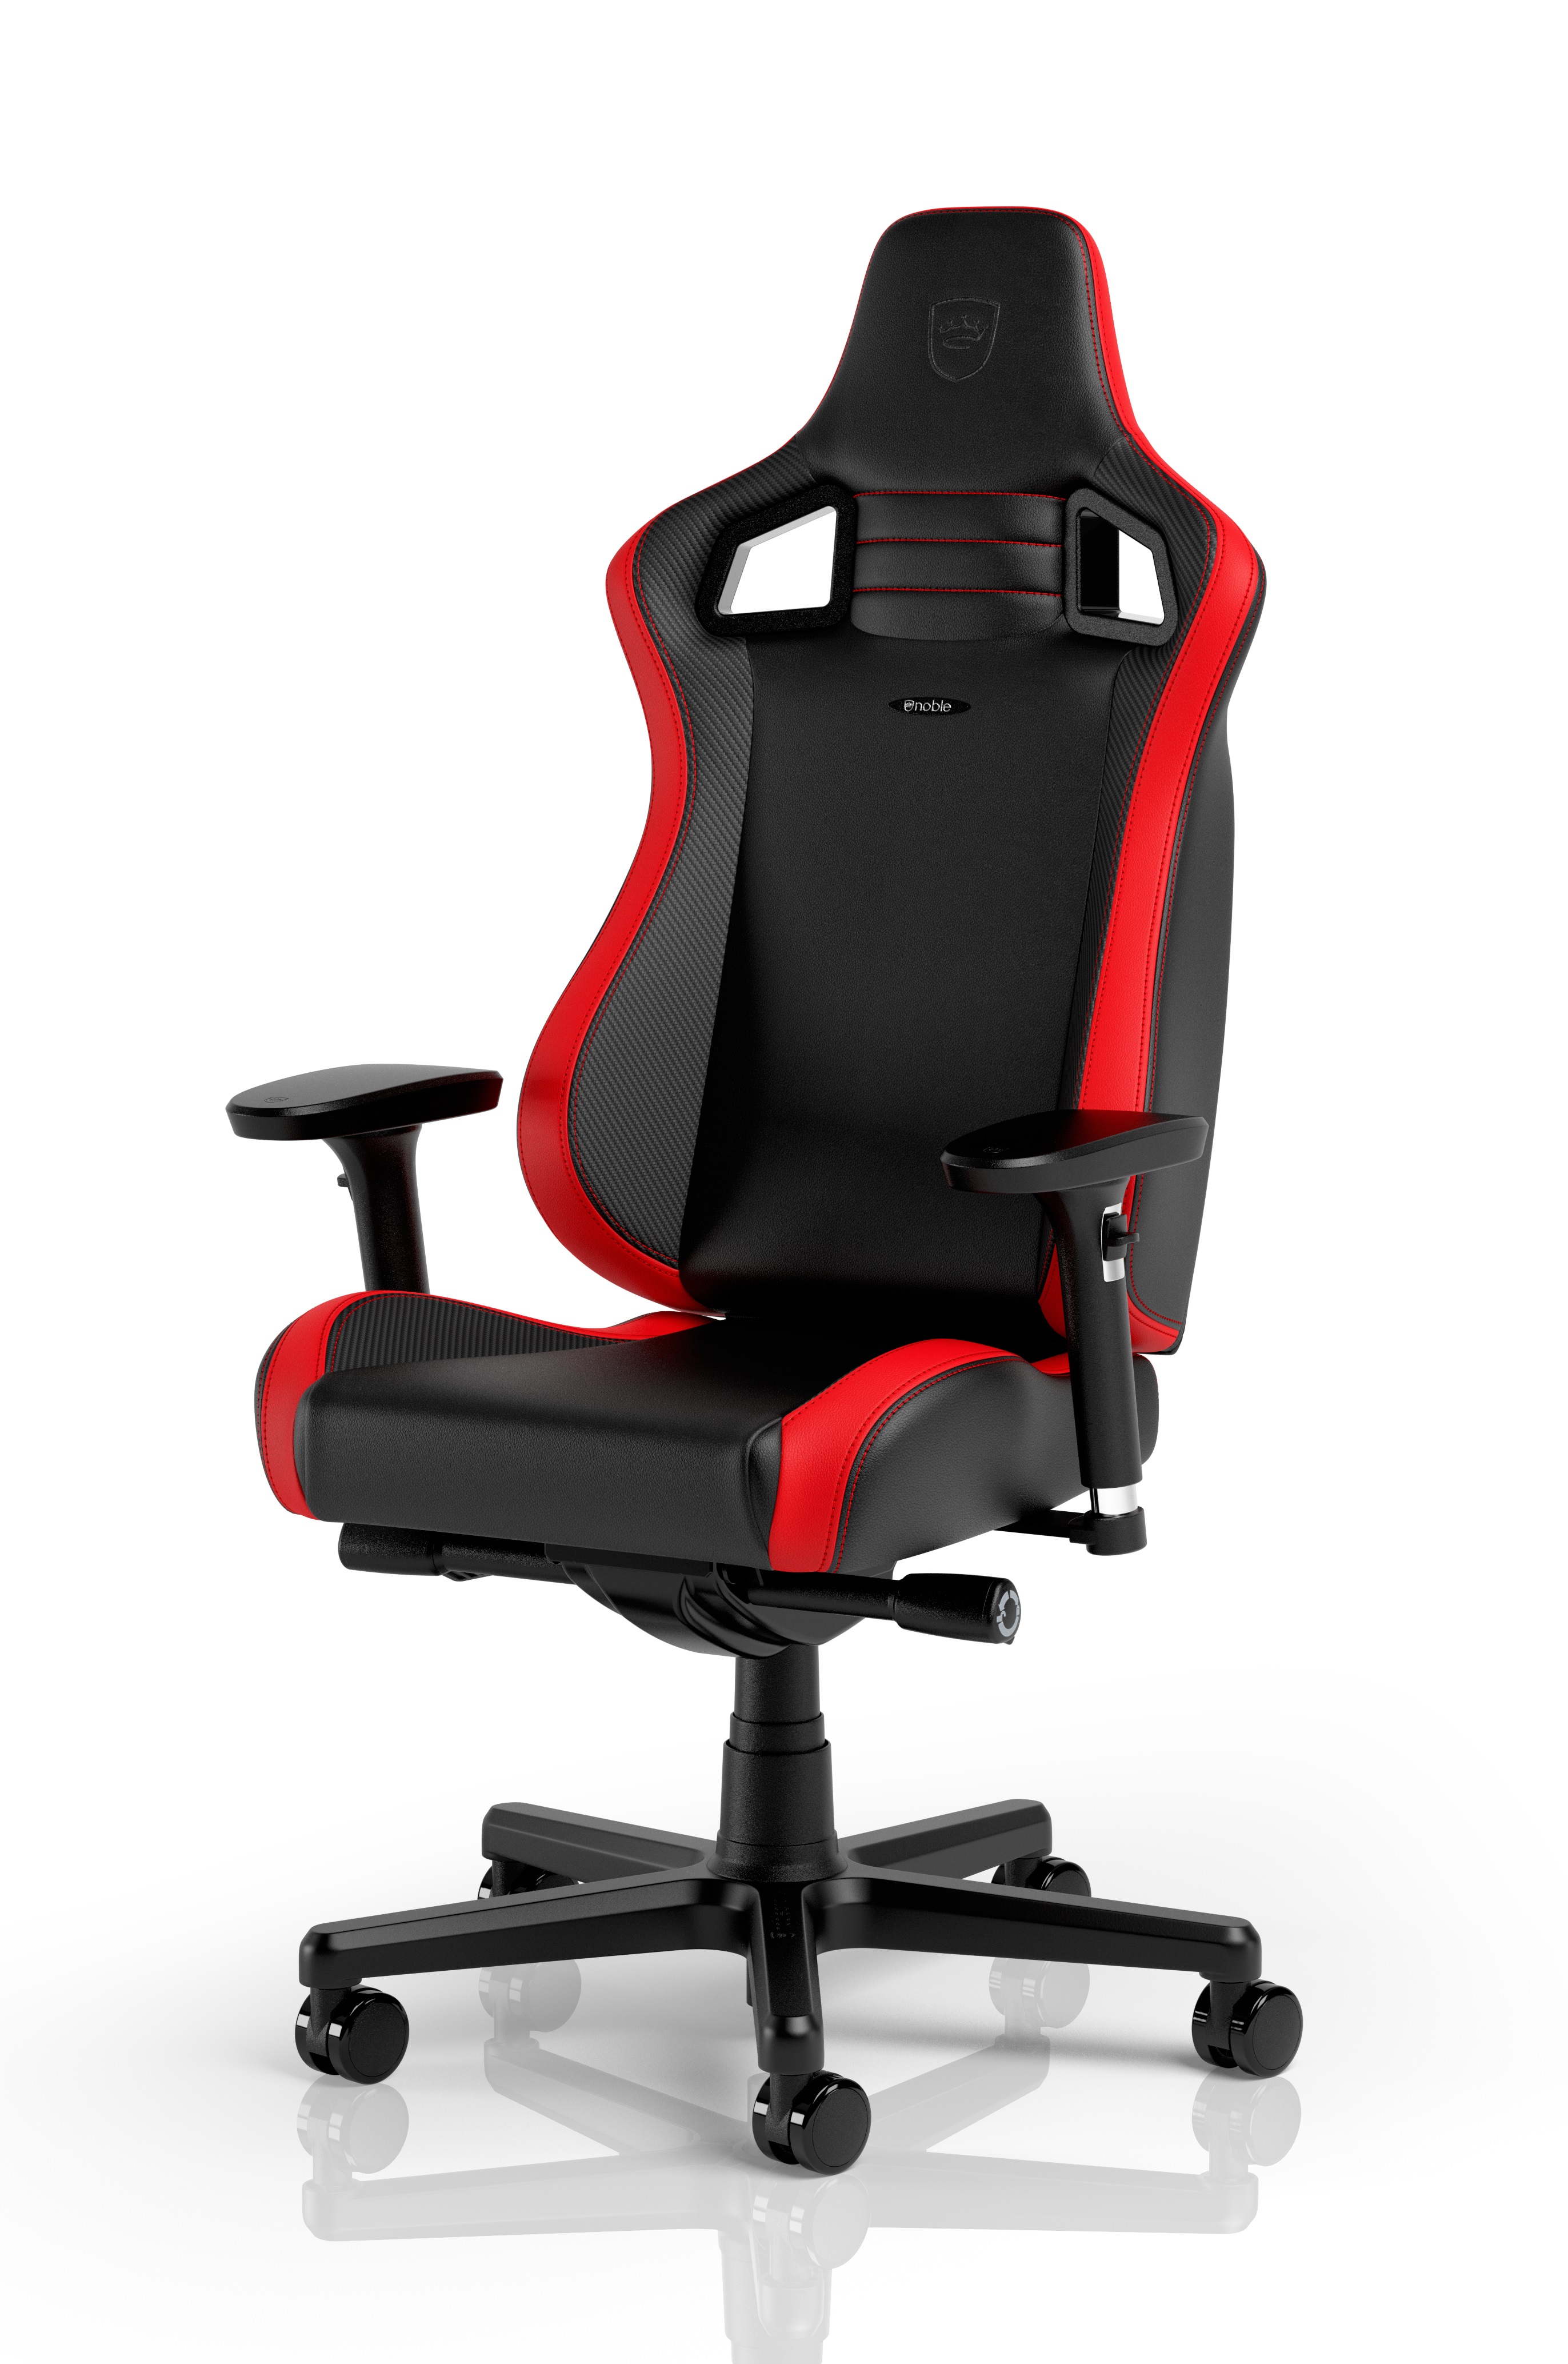 noblechairs EPIC Compact Gaming Chair-carbon/black/red